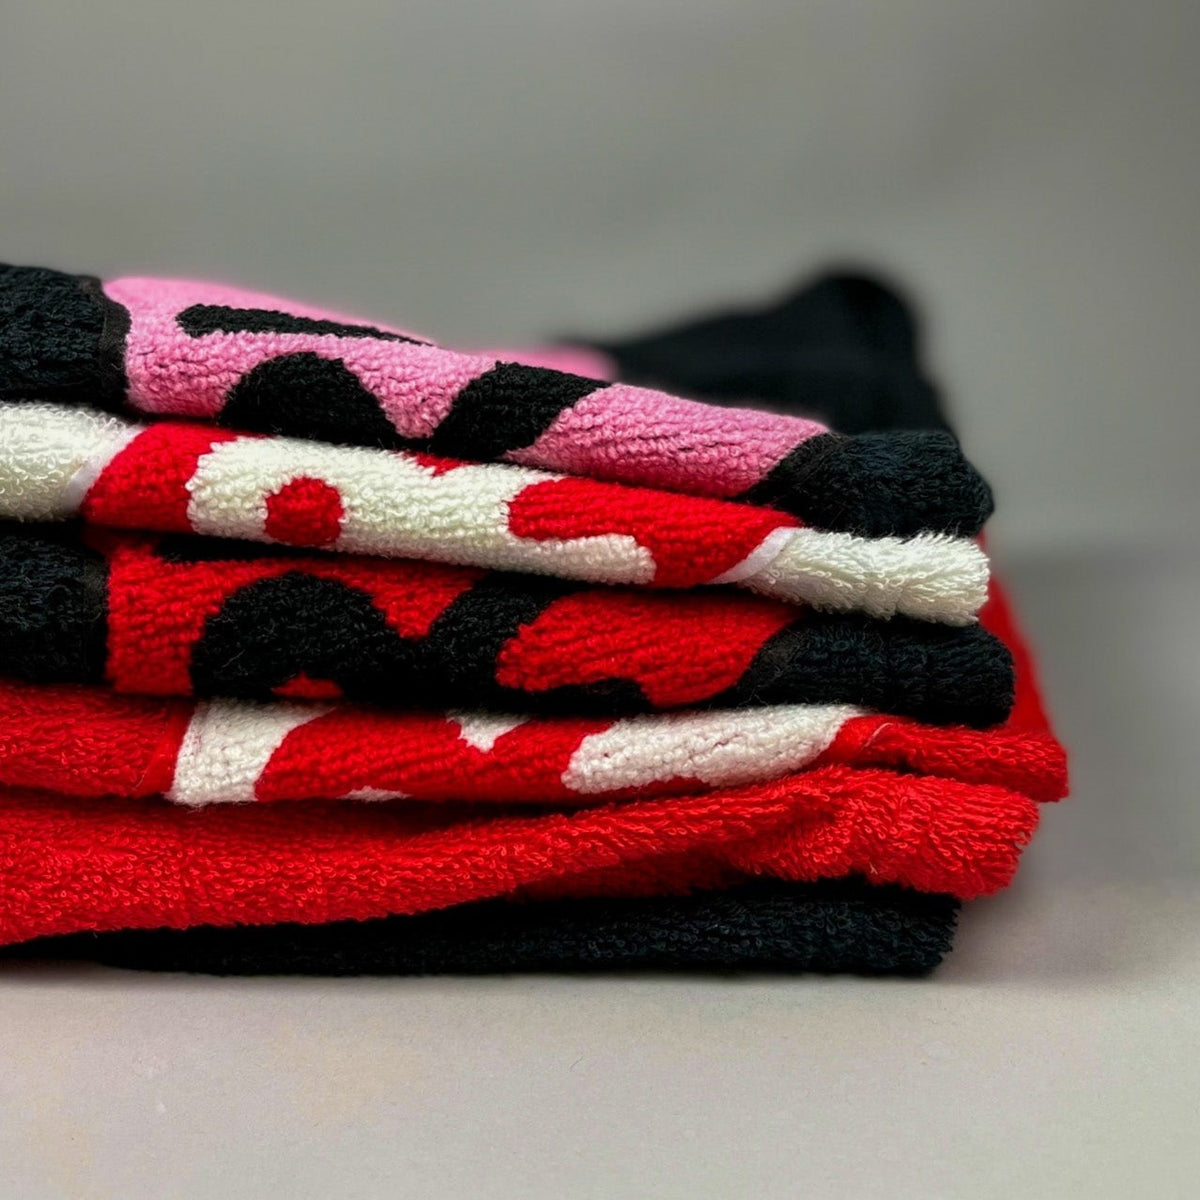 Chenille Patch Towel Shorts - RED LETTERS